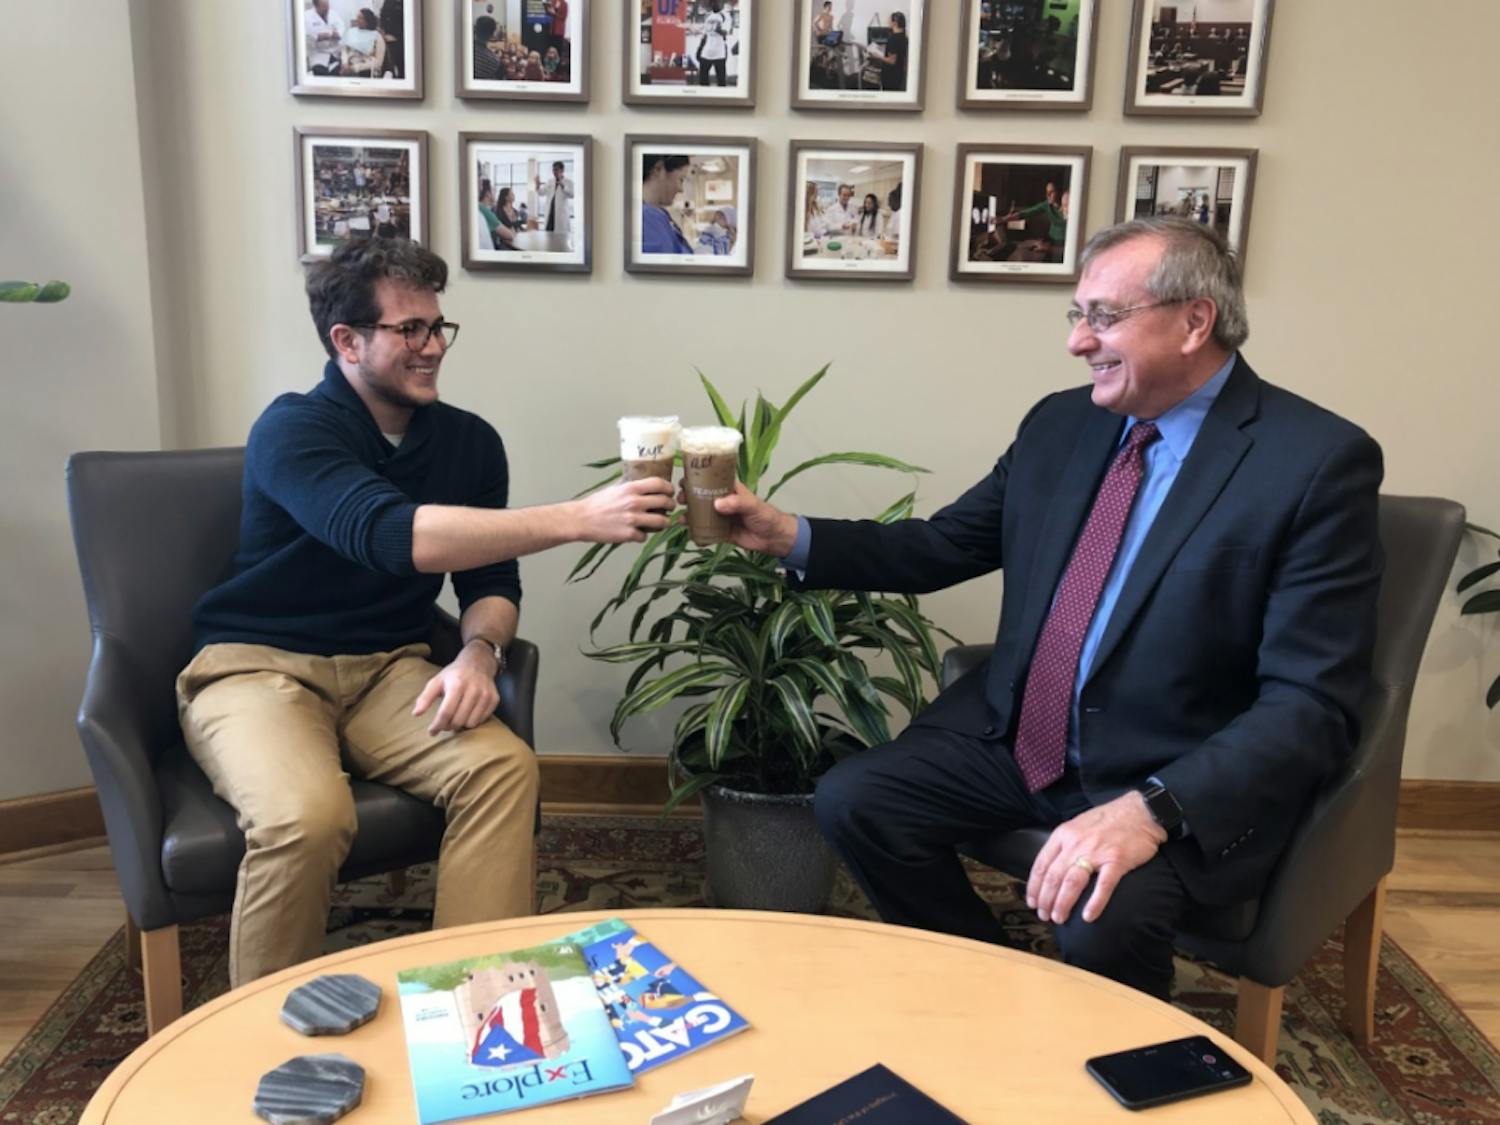 Kyle Cunningham, an Alligator columnist, and UF President Kent Fuchs, who has never had an iced coffee before, enjoy coffee together.